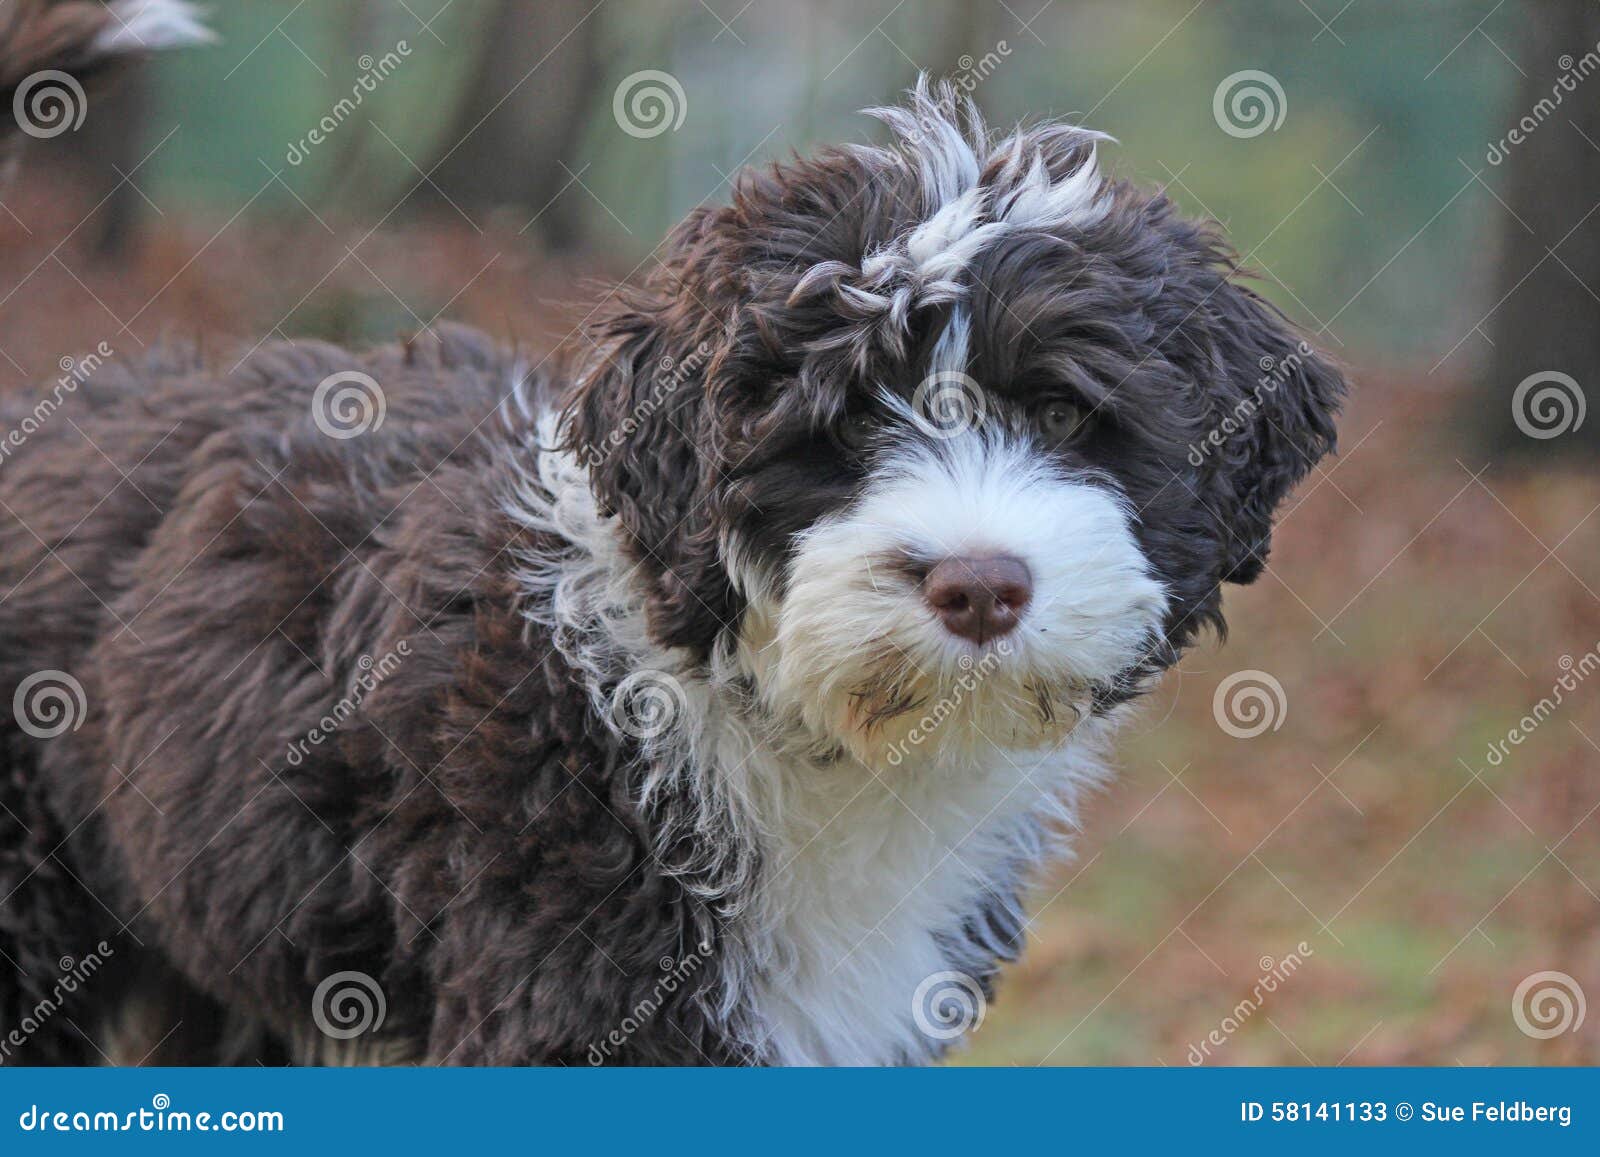 75 Puppy Portuguese Water Dog Photos Free Royalty Free Stock Photos From Dreamstime